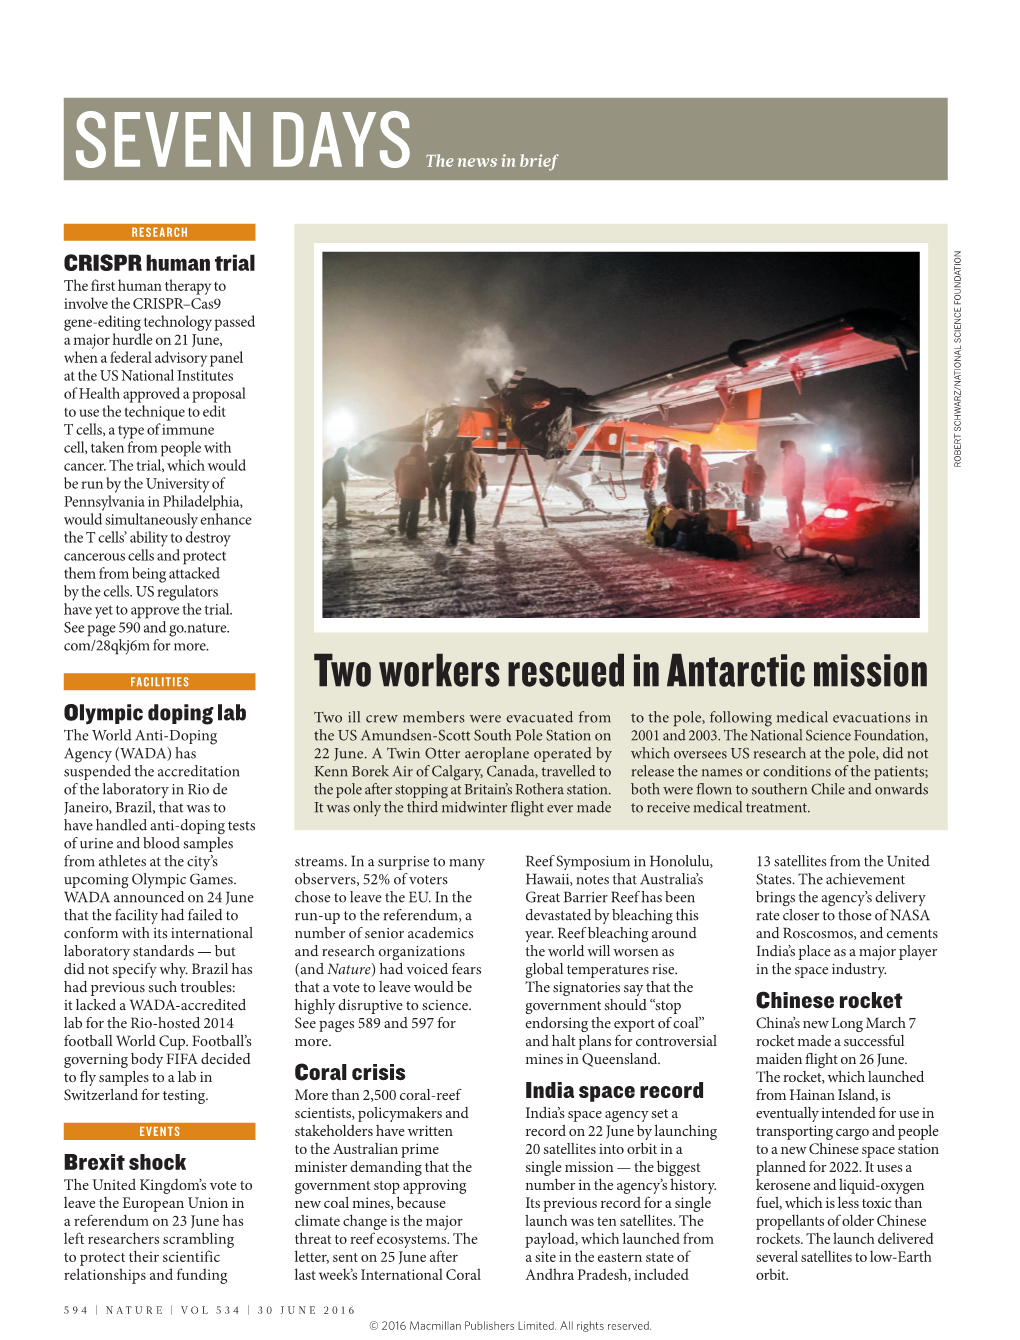 Two Workers Rescued in Antarctic Mission